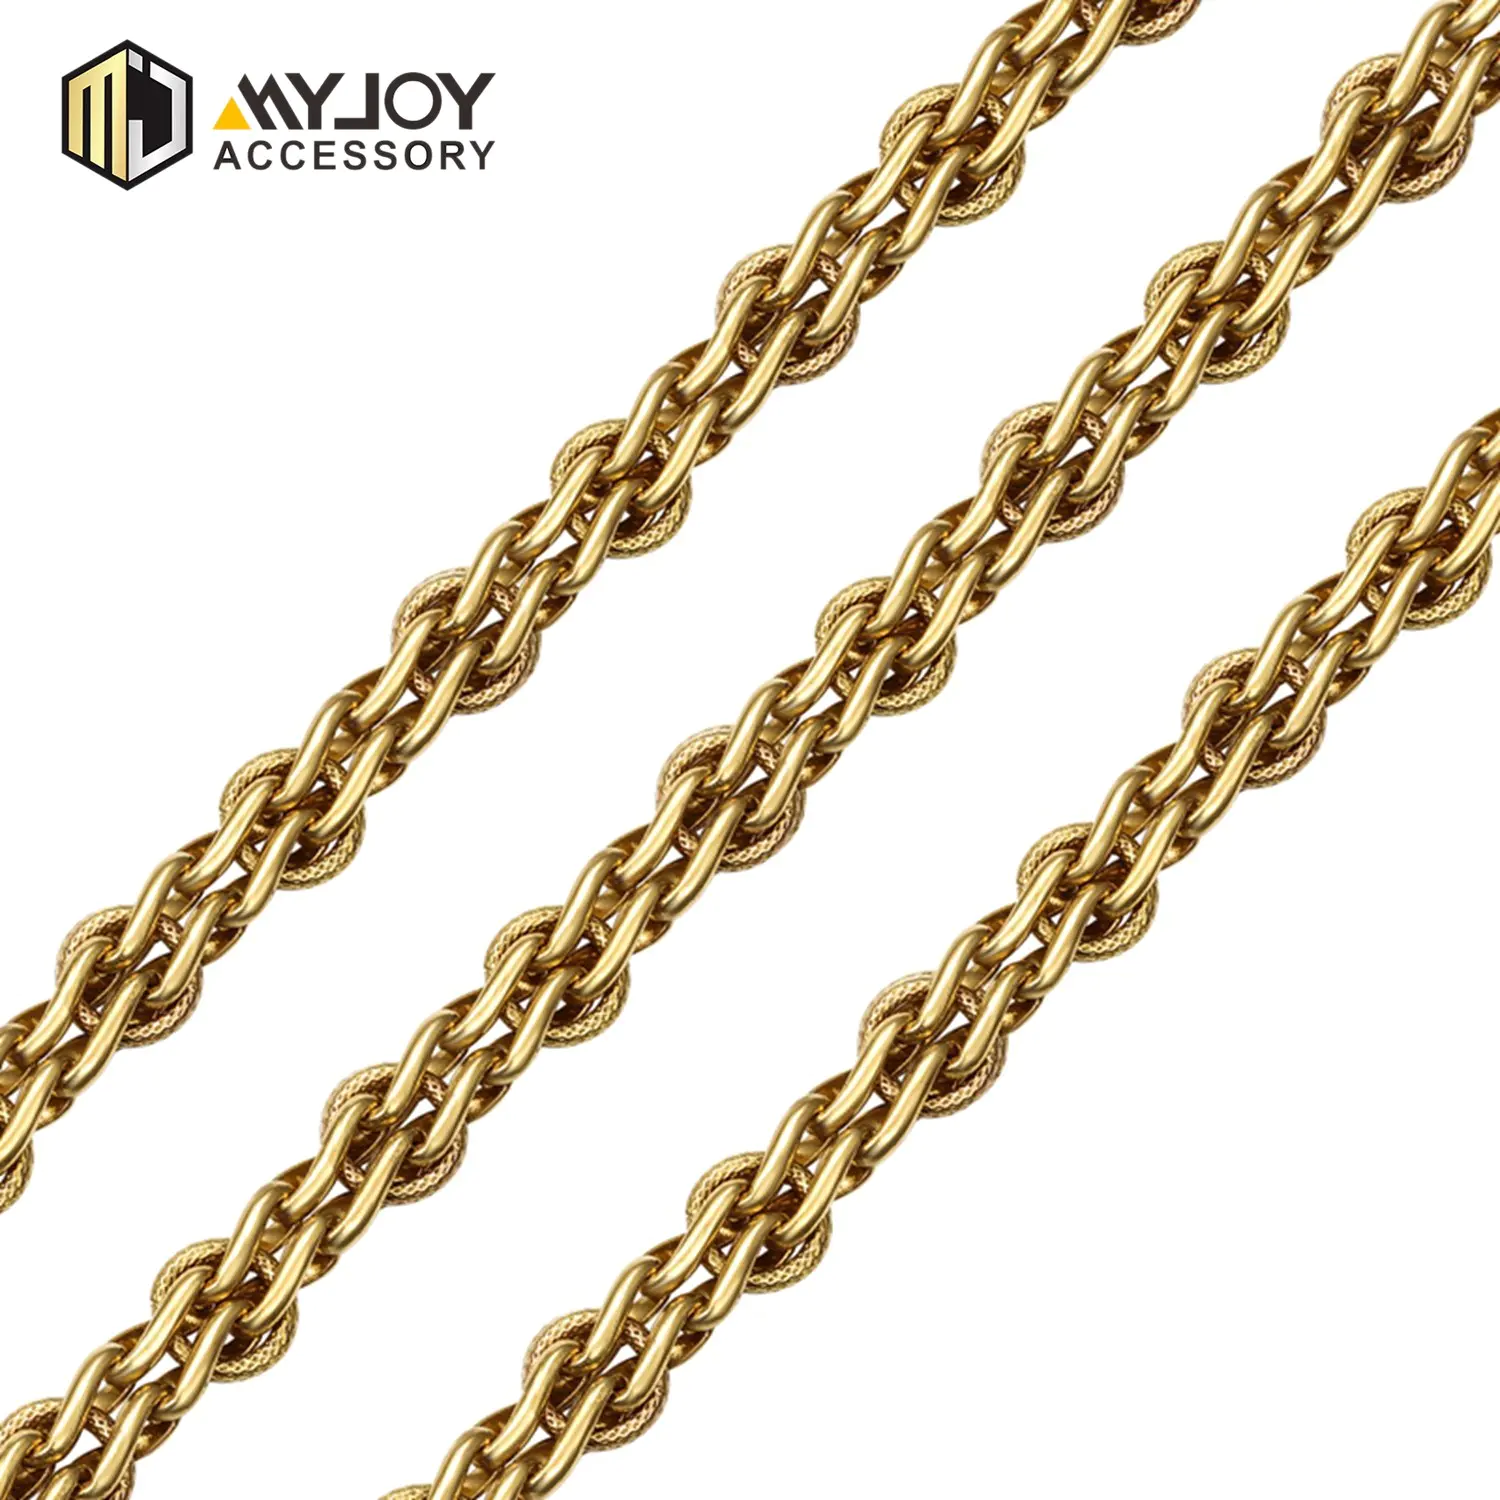 MYJOY zinc chain strap company for bags